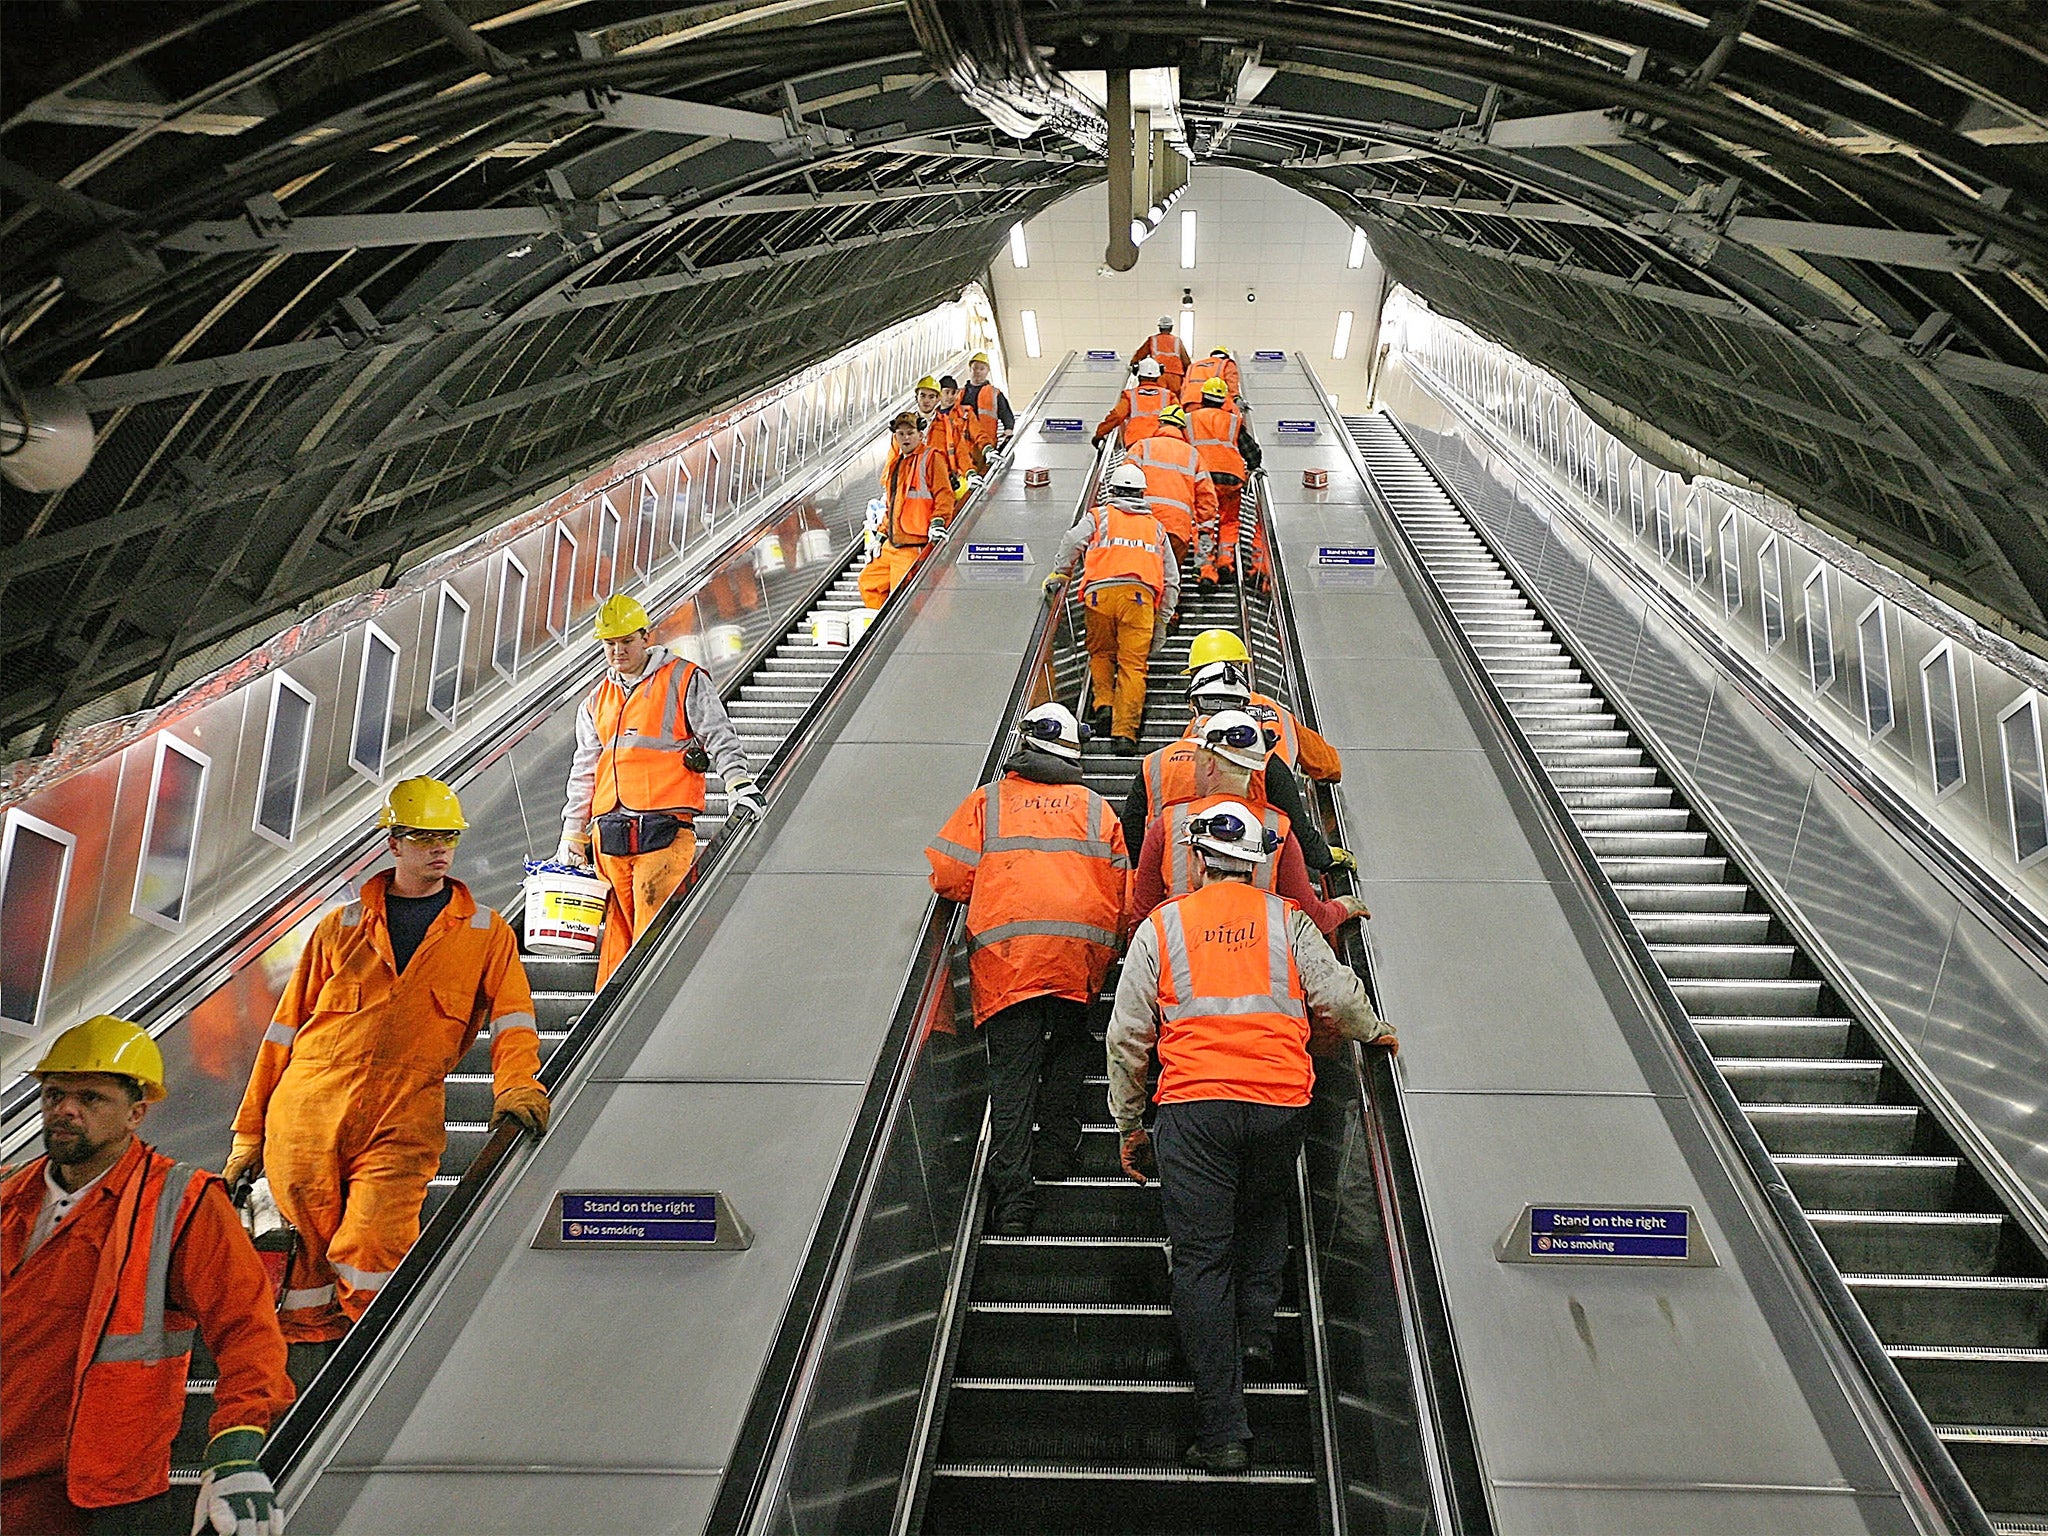 Maintenance workers arrive for their night shift at Victoria Underground station in London